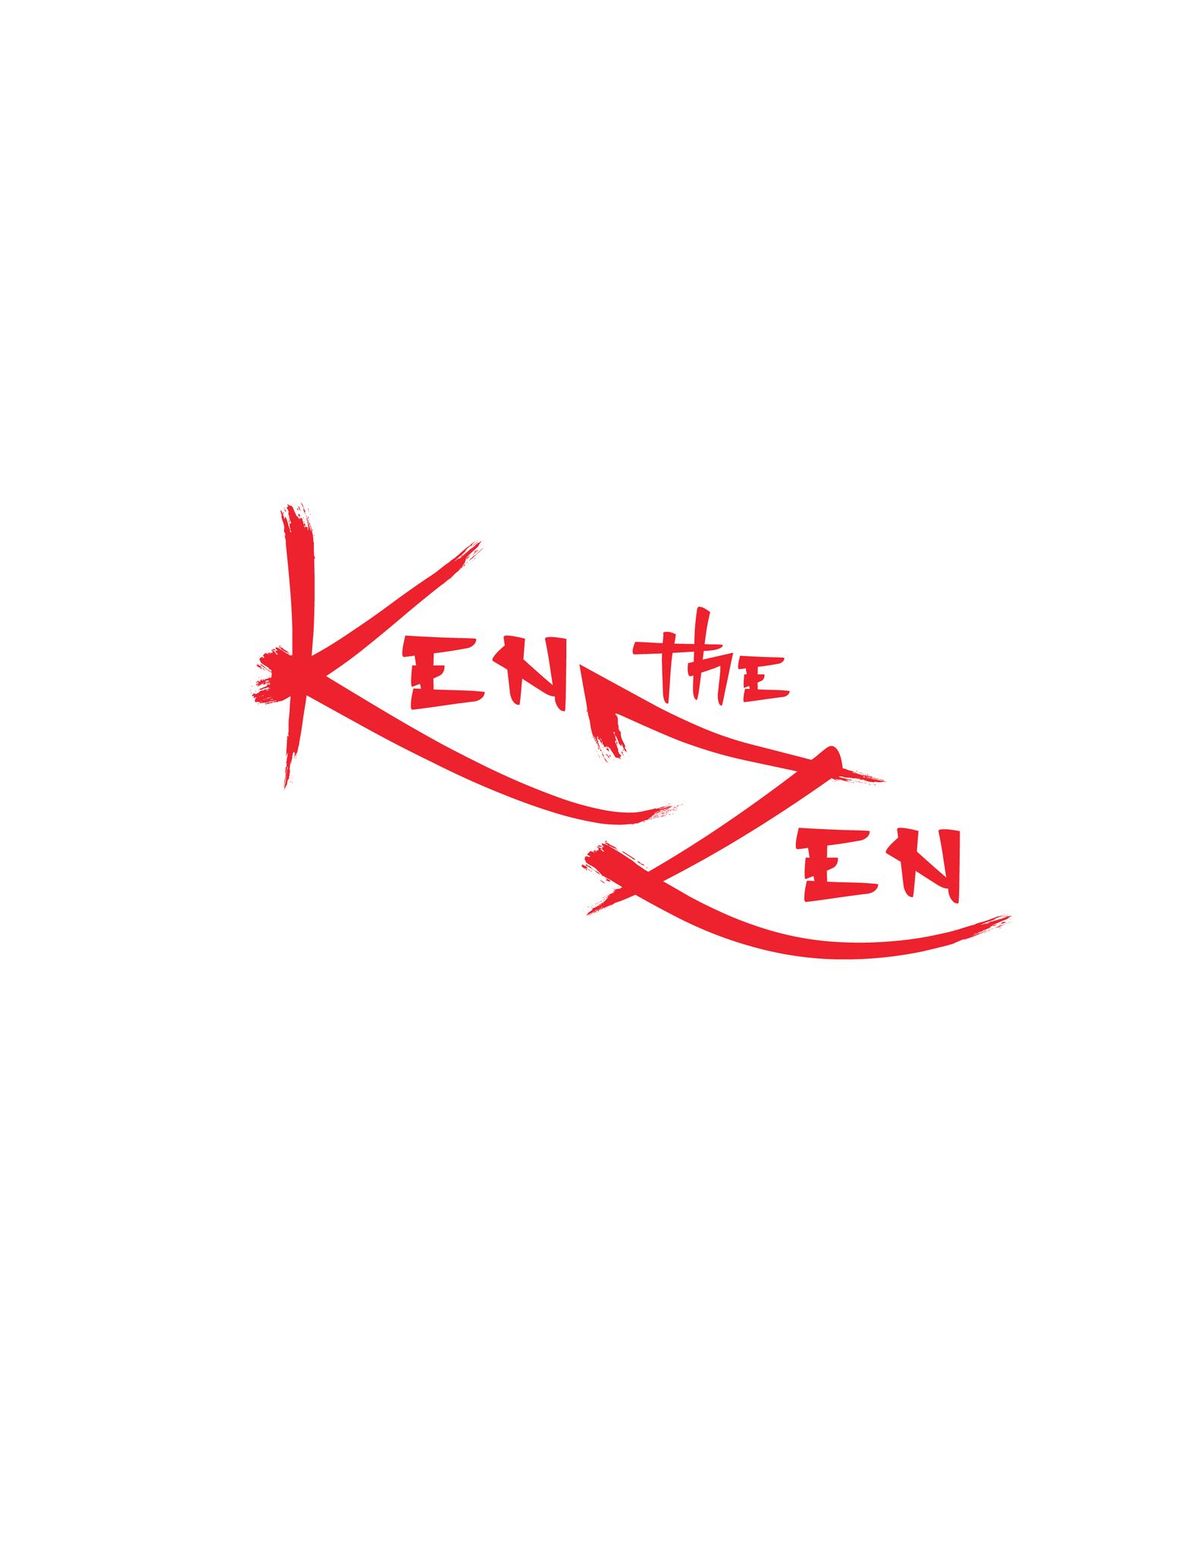 Ken the Zen live at The Morrisey House